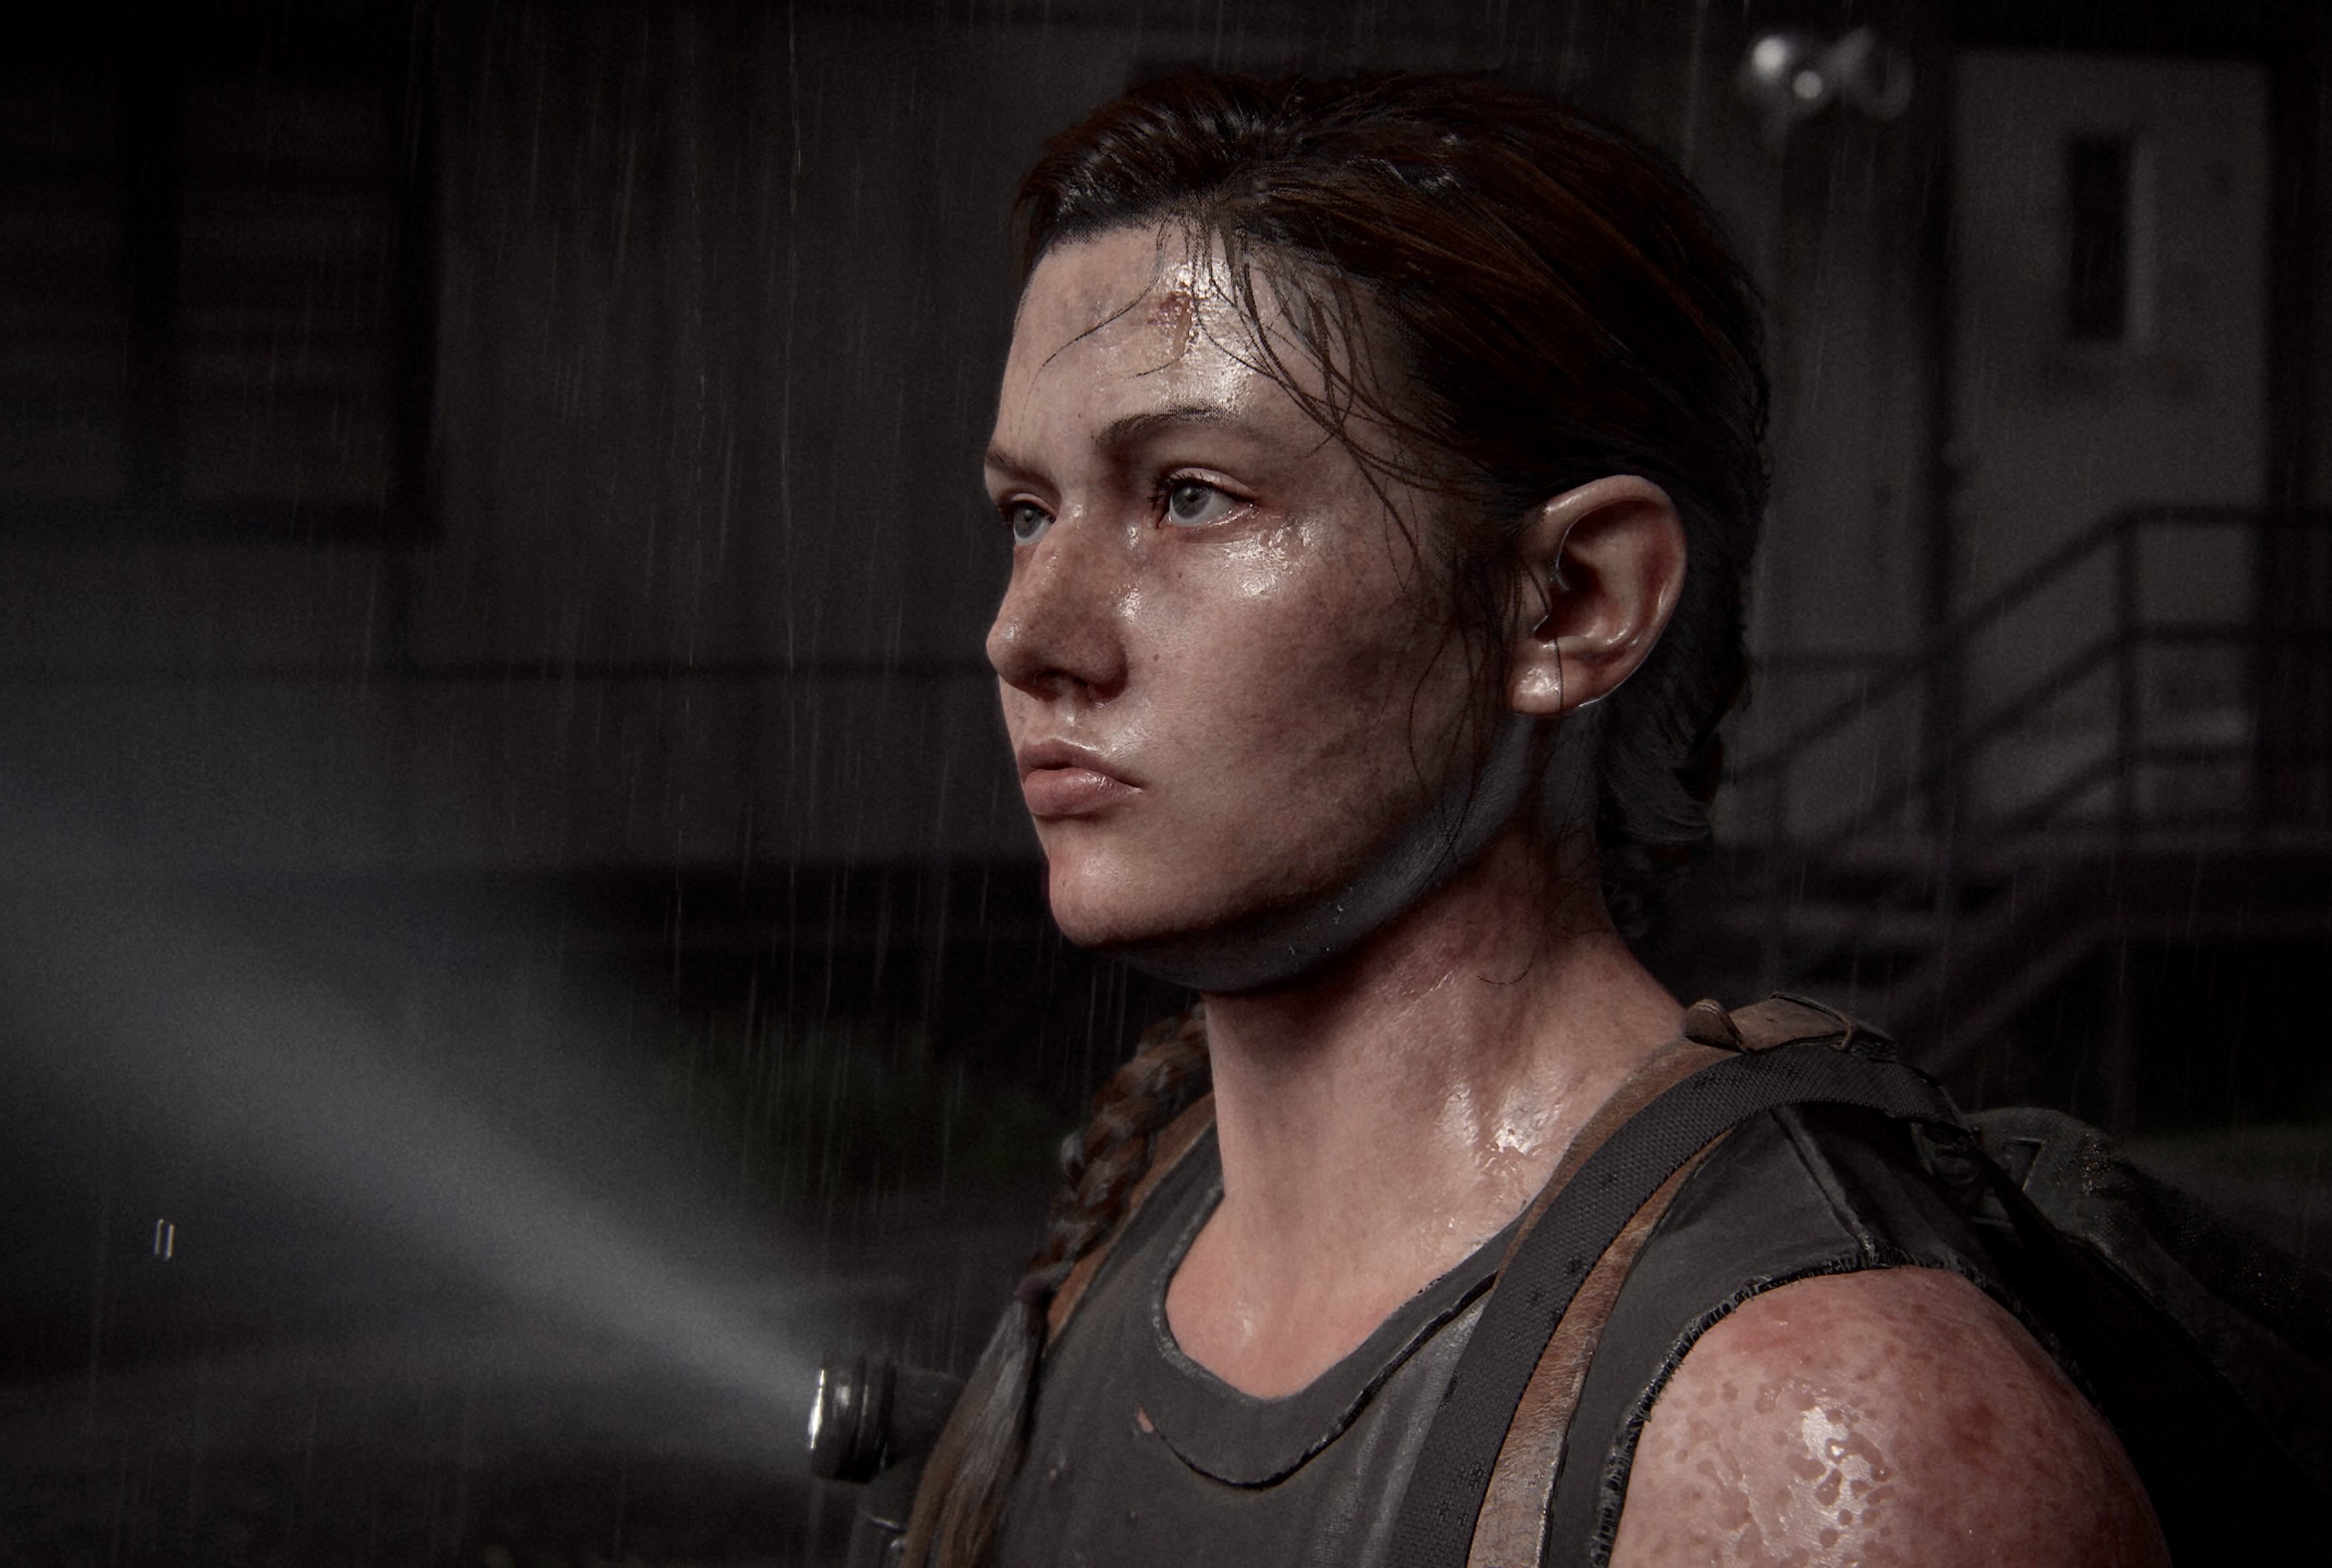 Young Abby Anderson - The Last of Us Part II by CapricaPuddin on